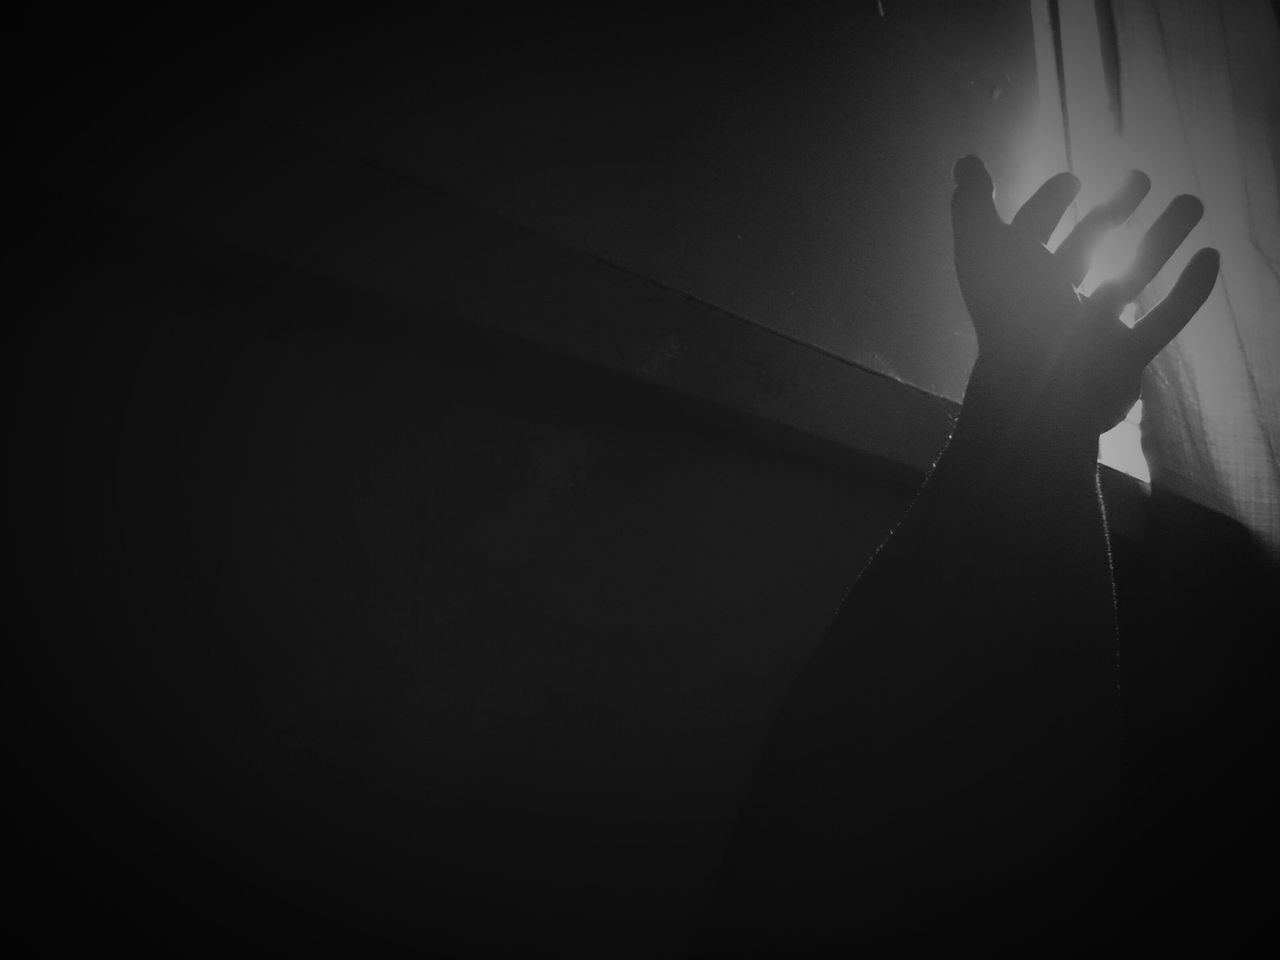 indoors, lifestyles, leisure activity, person, men, dark, unrecognizable person, shadow, part of, standing, silhouette, night, wall - building feature, copy space, holding, human finger